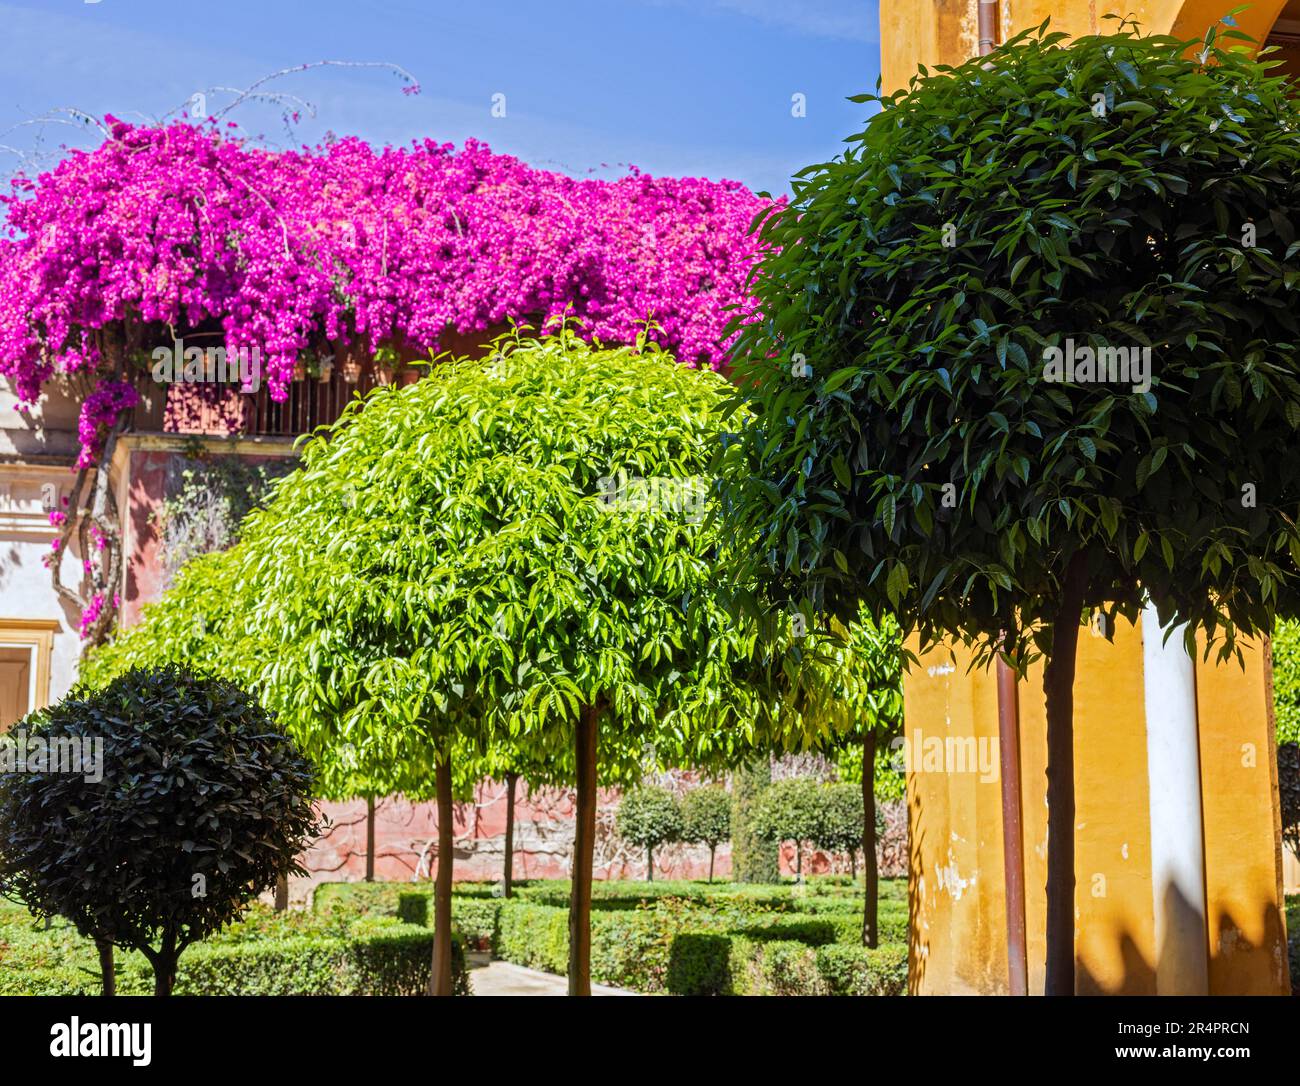 Spain, Seville, Andalucia,a Casa de Pilatos (Pilate's House), garden with various shapes of shrubbery, bougainvillea in bloom. Stock Photo